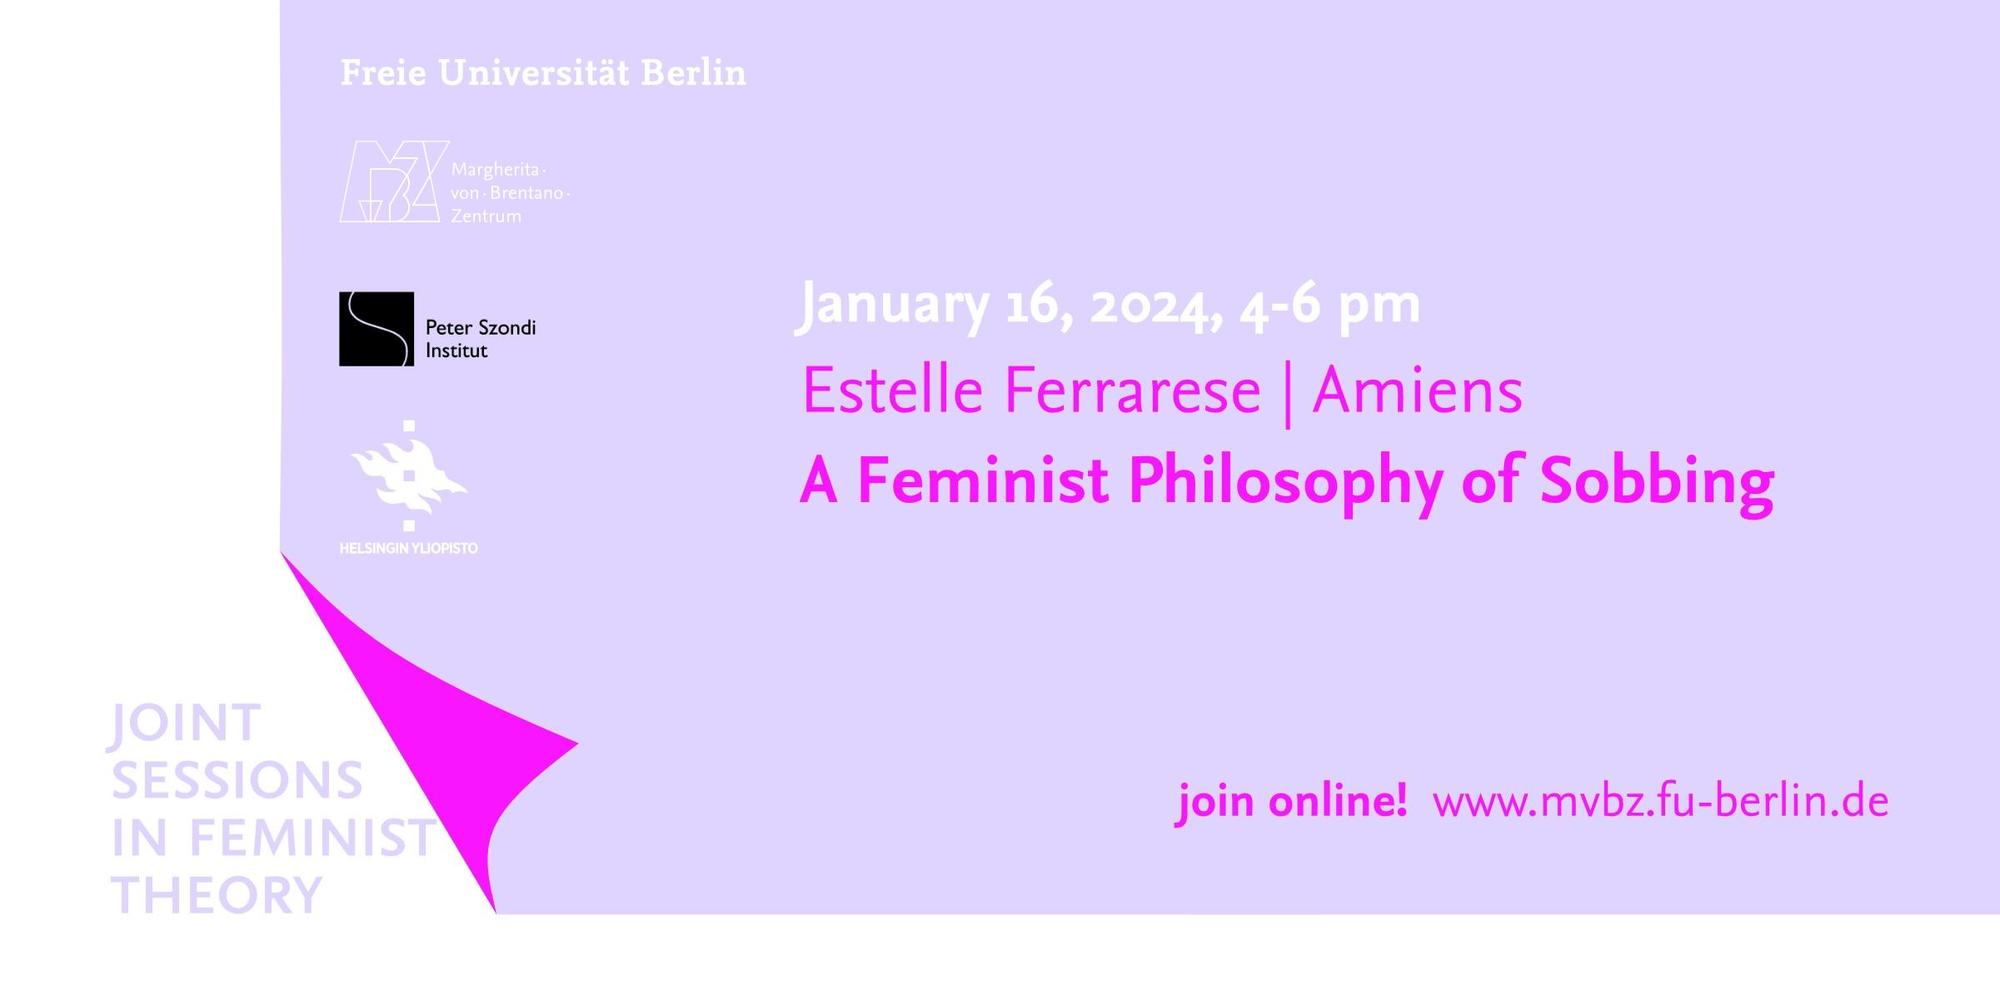 Joint Sessions in Feminist Theory, 16.01.2024